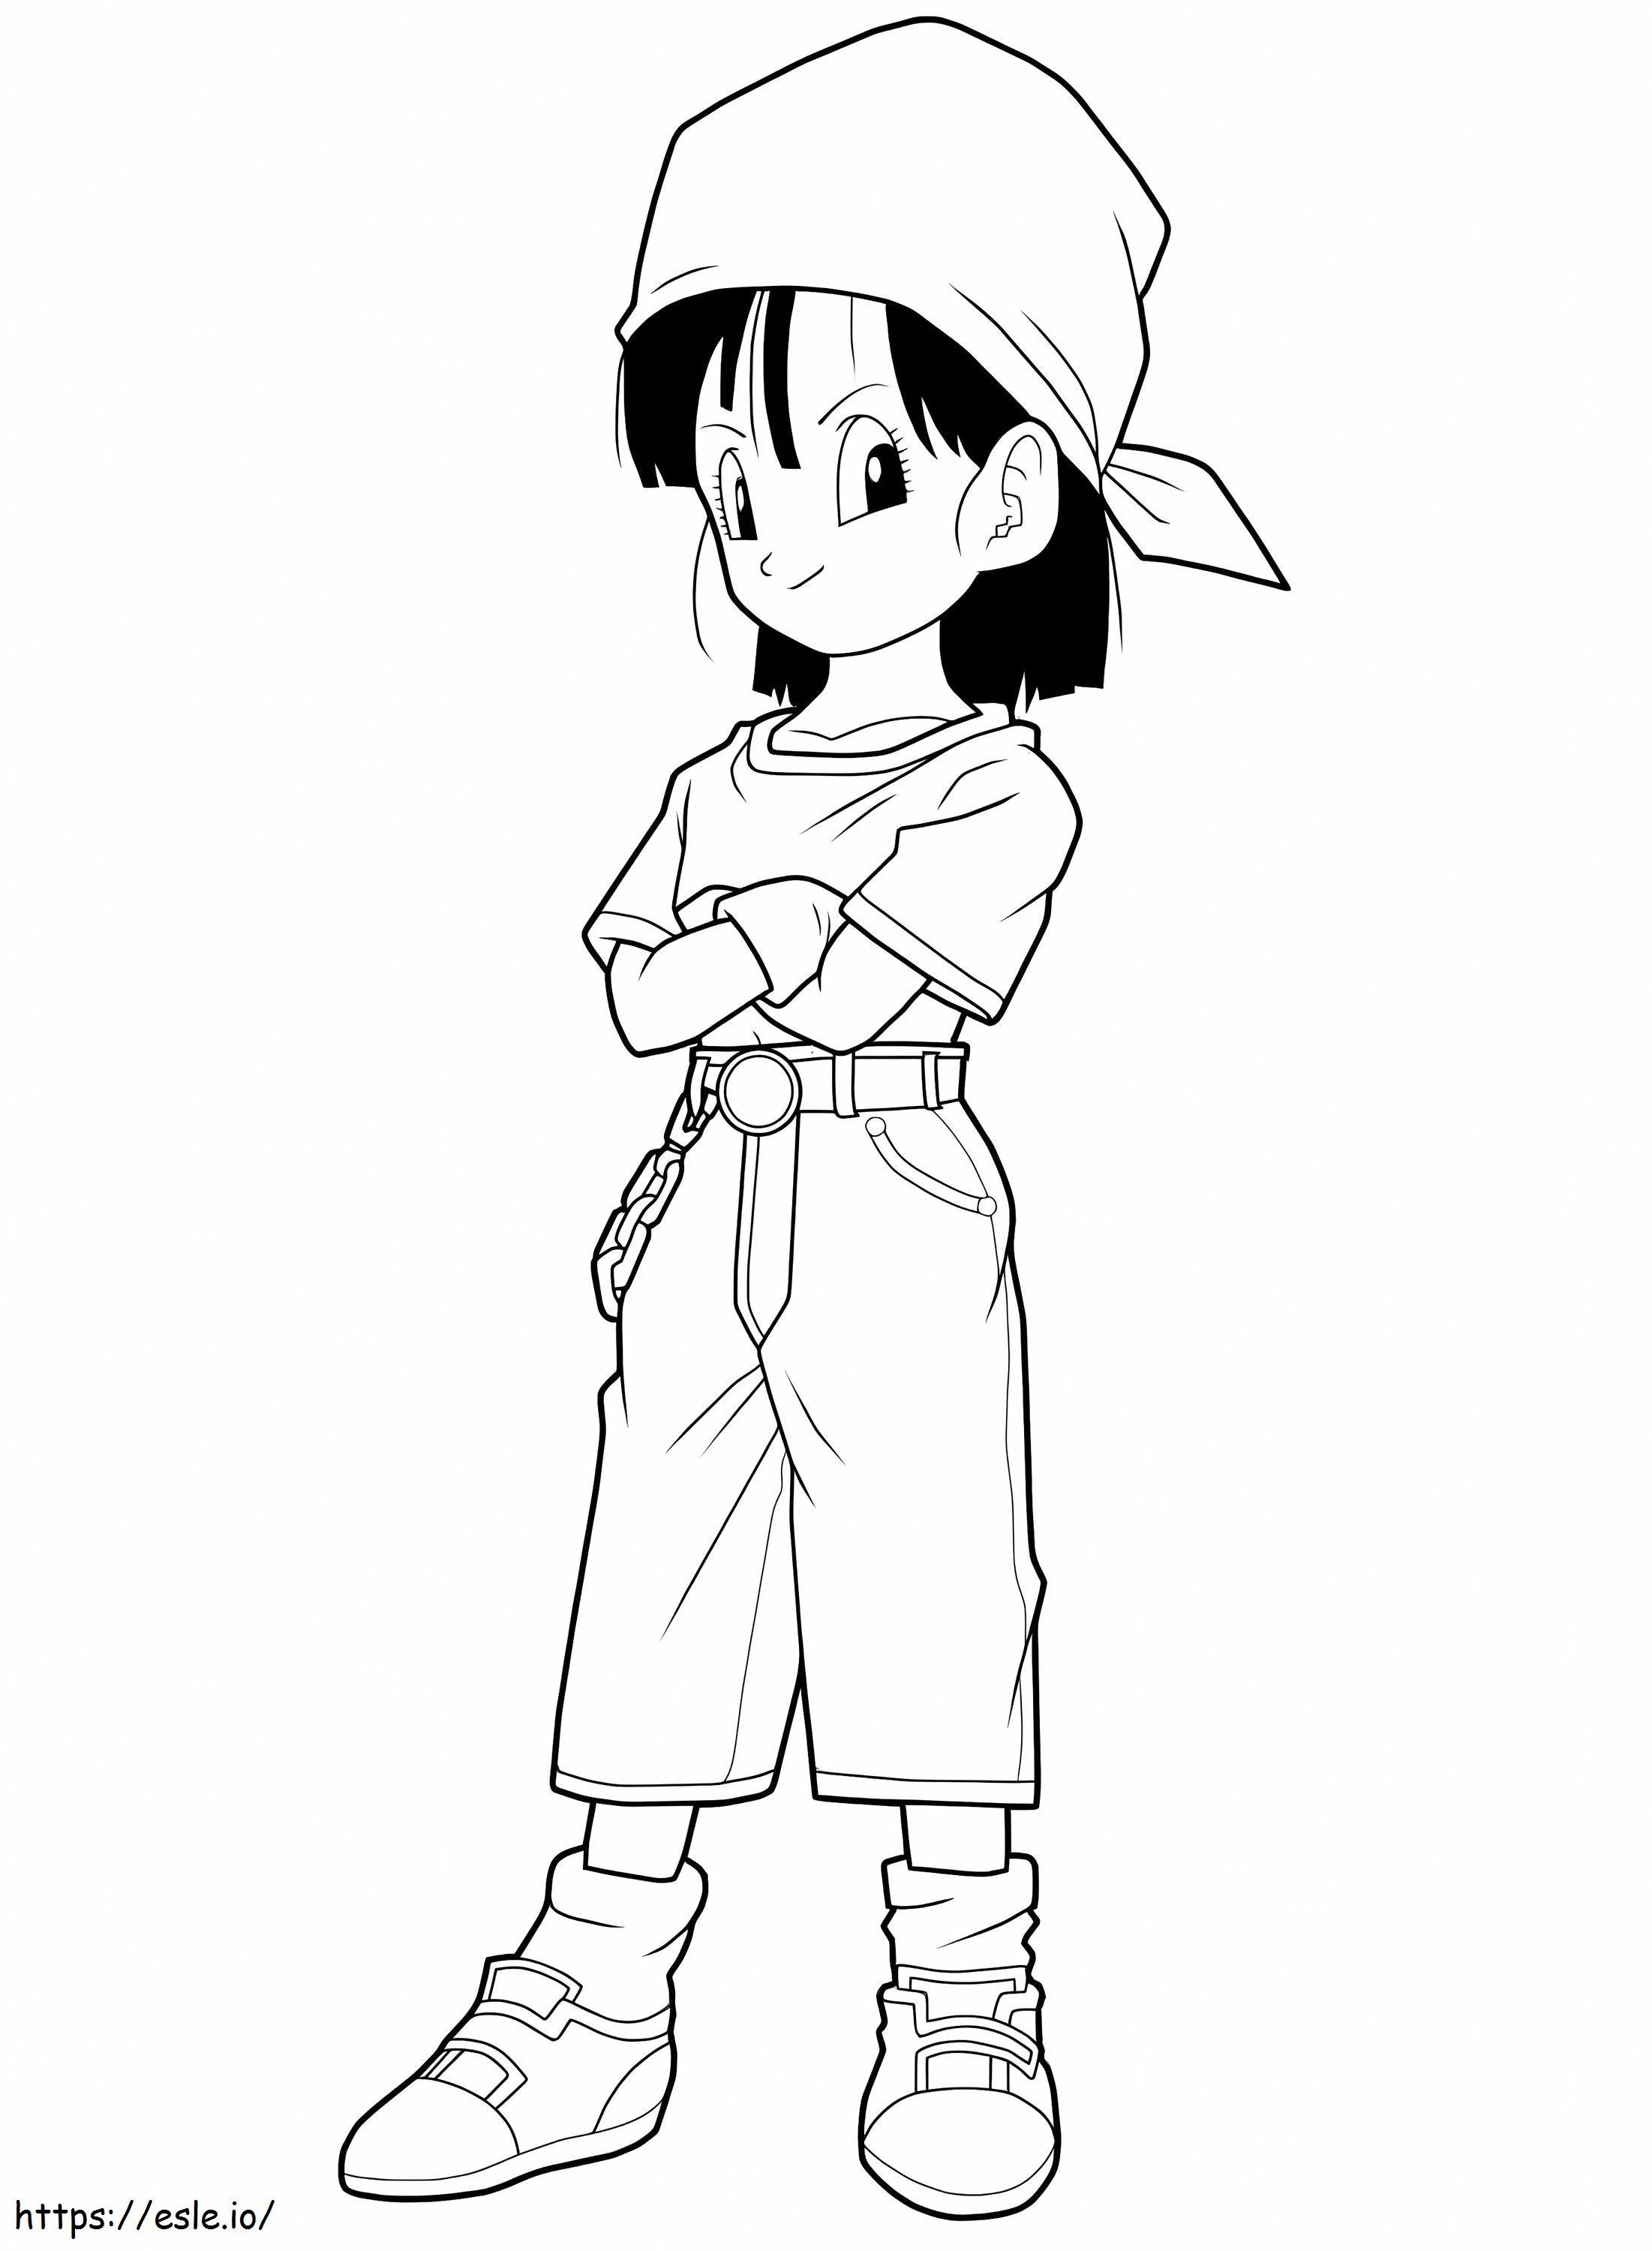 Young Bulma coloring page